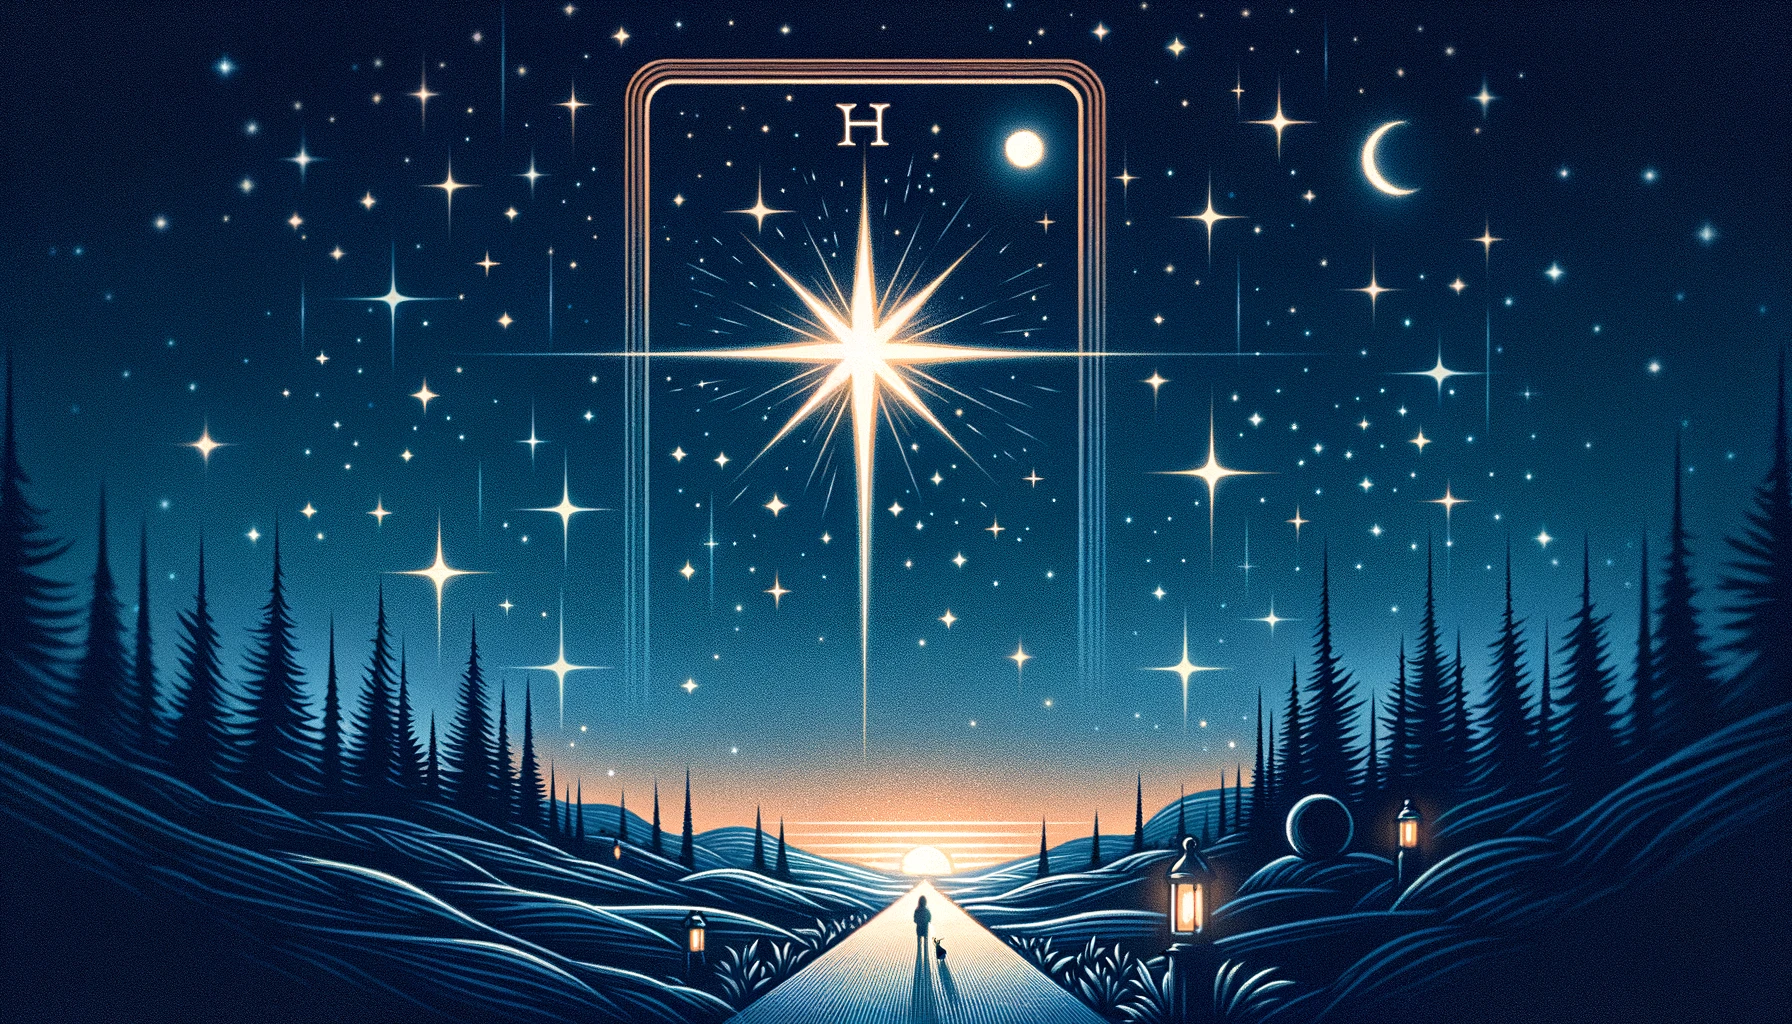 "Illustration embodying the essence of optimism and guidance, setting a peaceful and certain tone for your article discussing the implications of drawing 'The Star' in divination as a Yes or No answer. It highlights its potential for bringing hope, healing, and the promise of a positive turn."